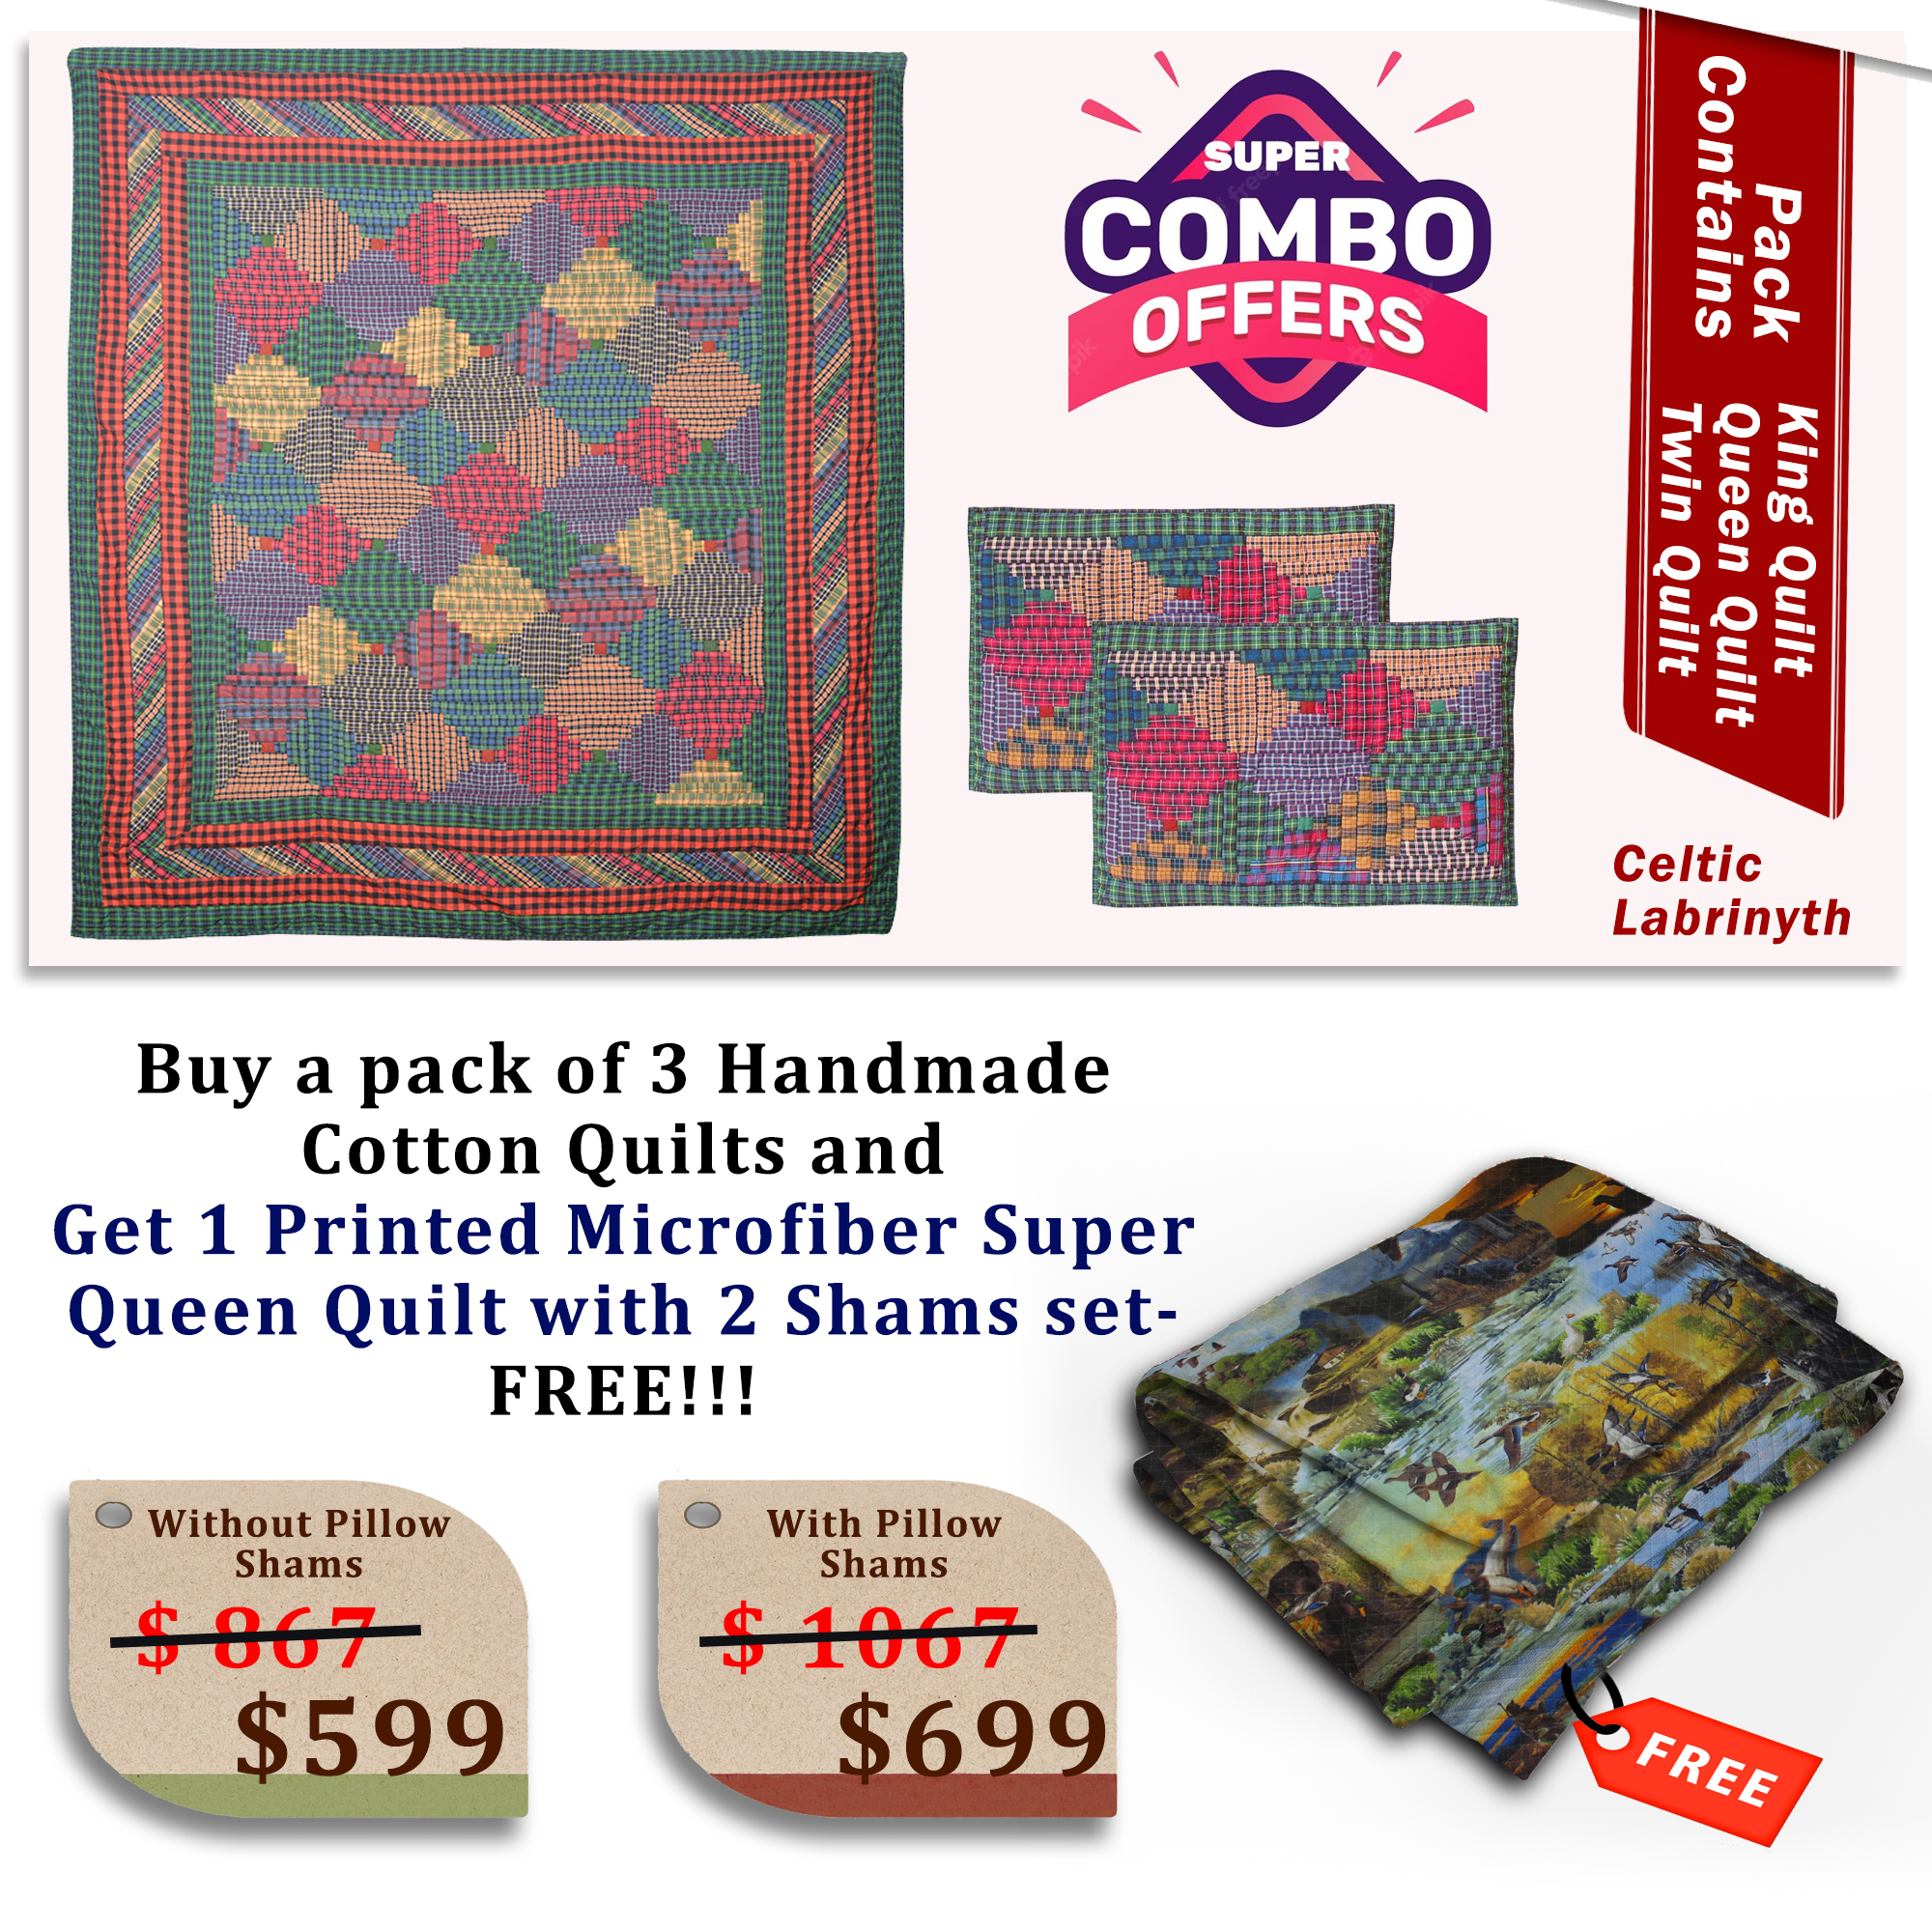 Celtic Labrinyth - Handmade Cotton quilts | Buy 3 cotton quilts and get 1 Printed Microfiber Super Queen Quilt with 2 Shams set FREE